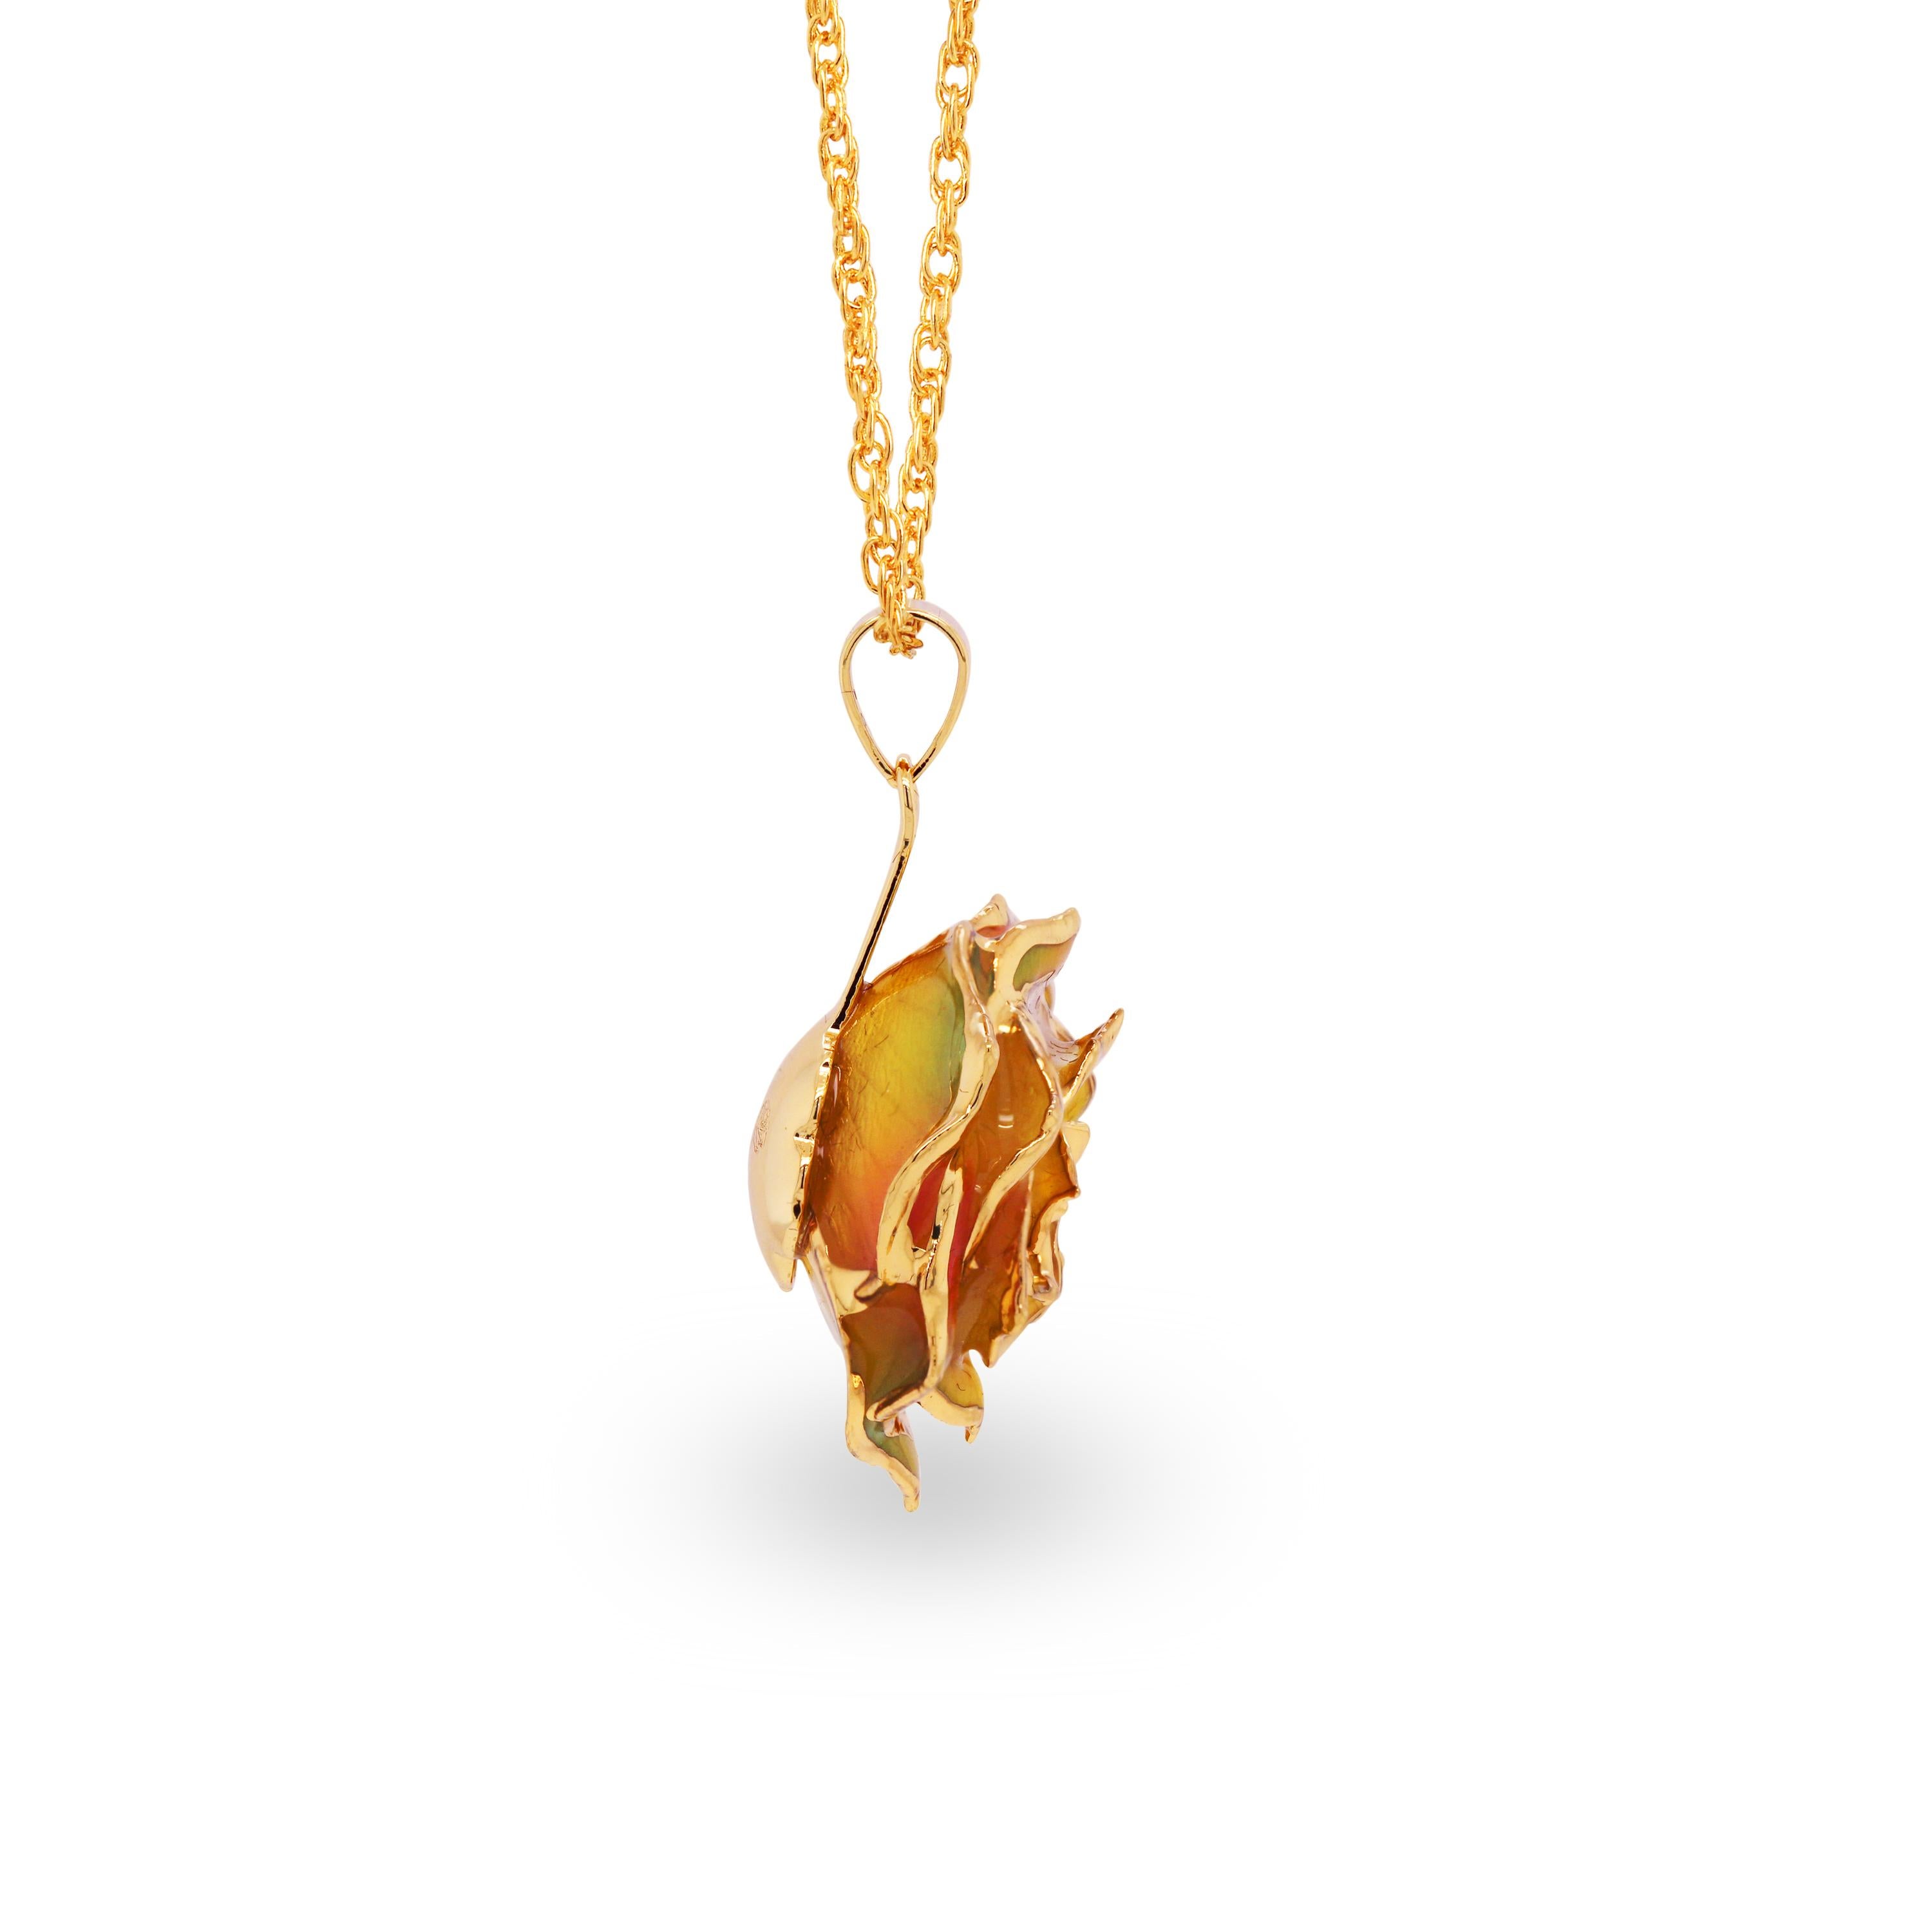 eternal rose with necklace